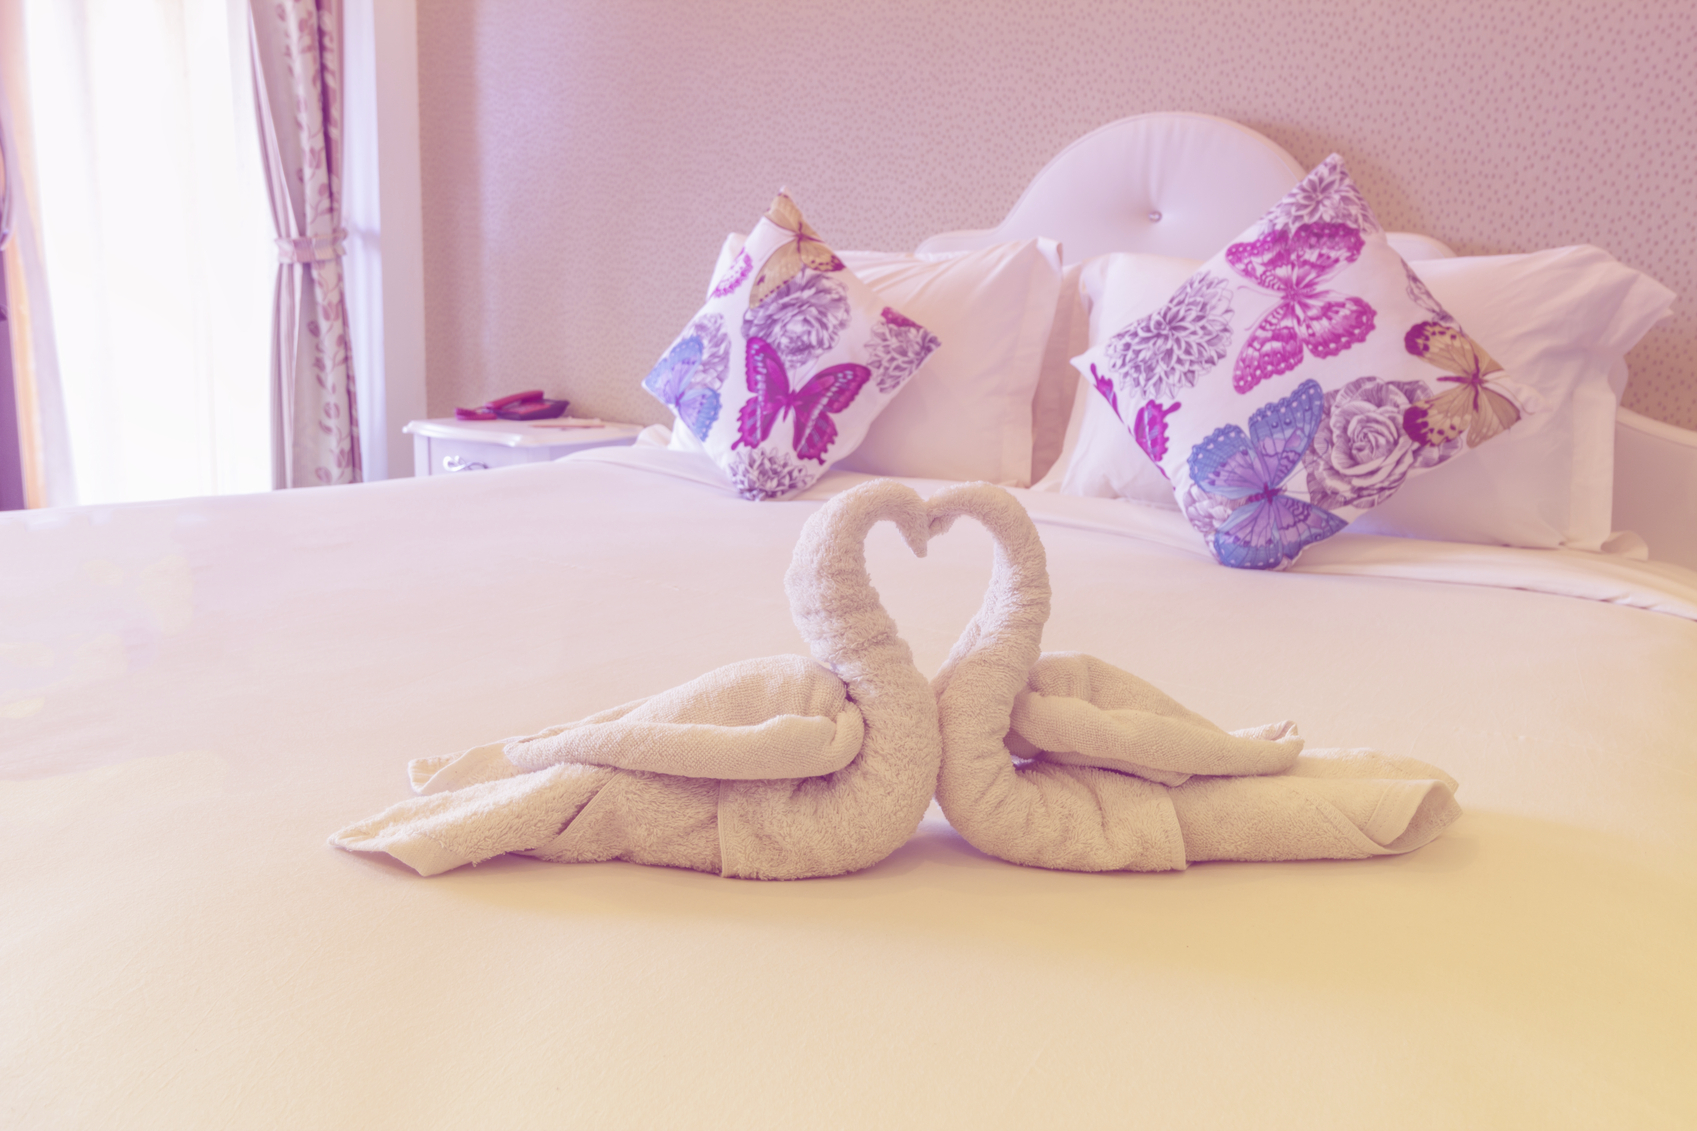 Check Out These Pretty Towel Sculptures